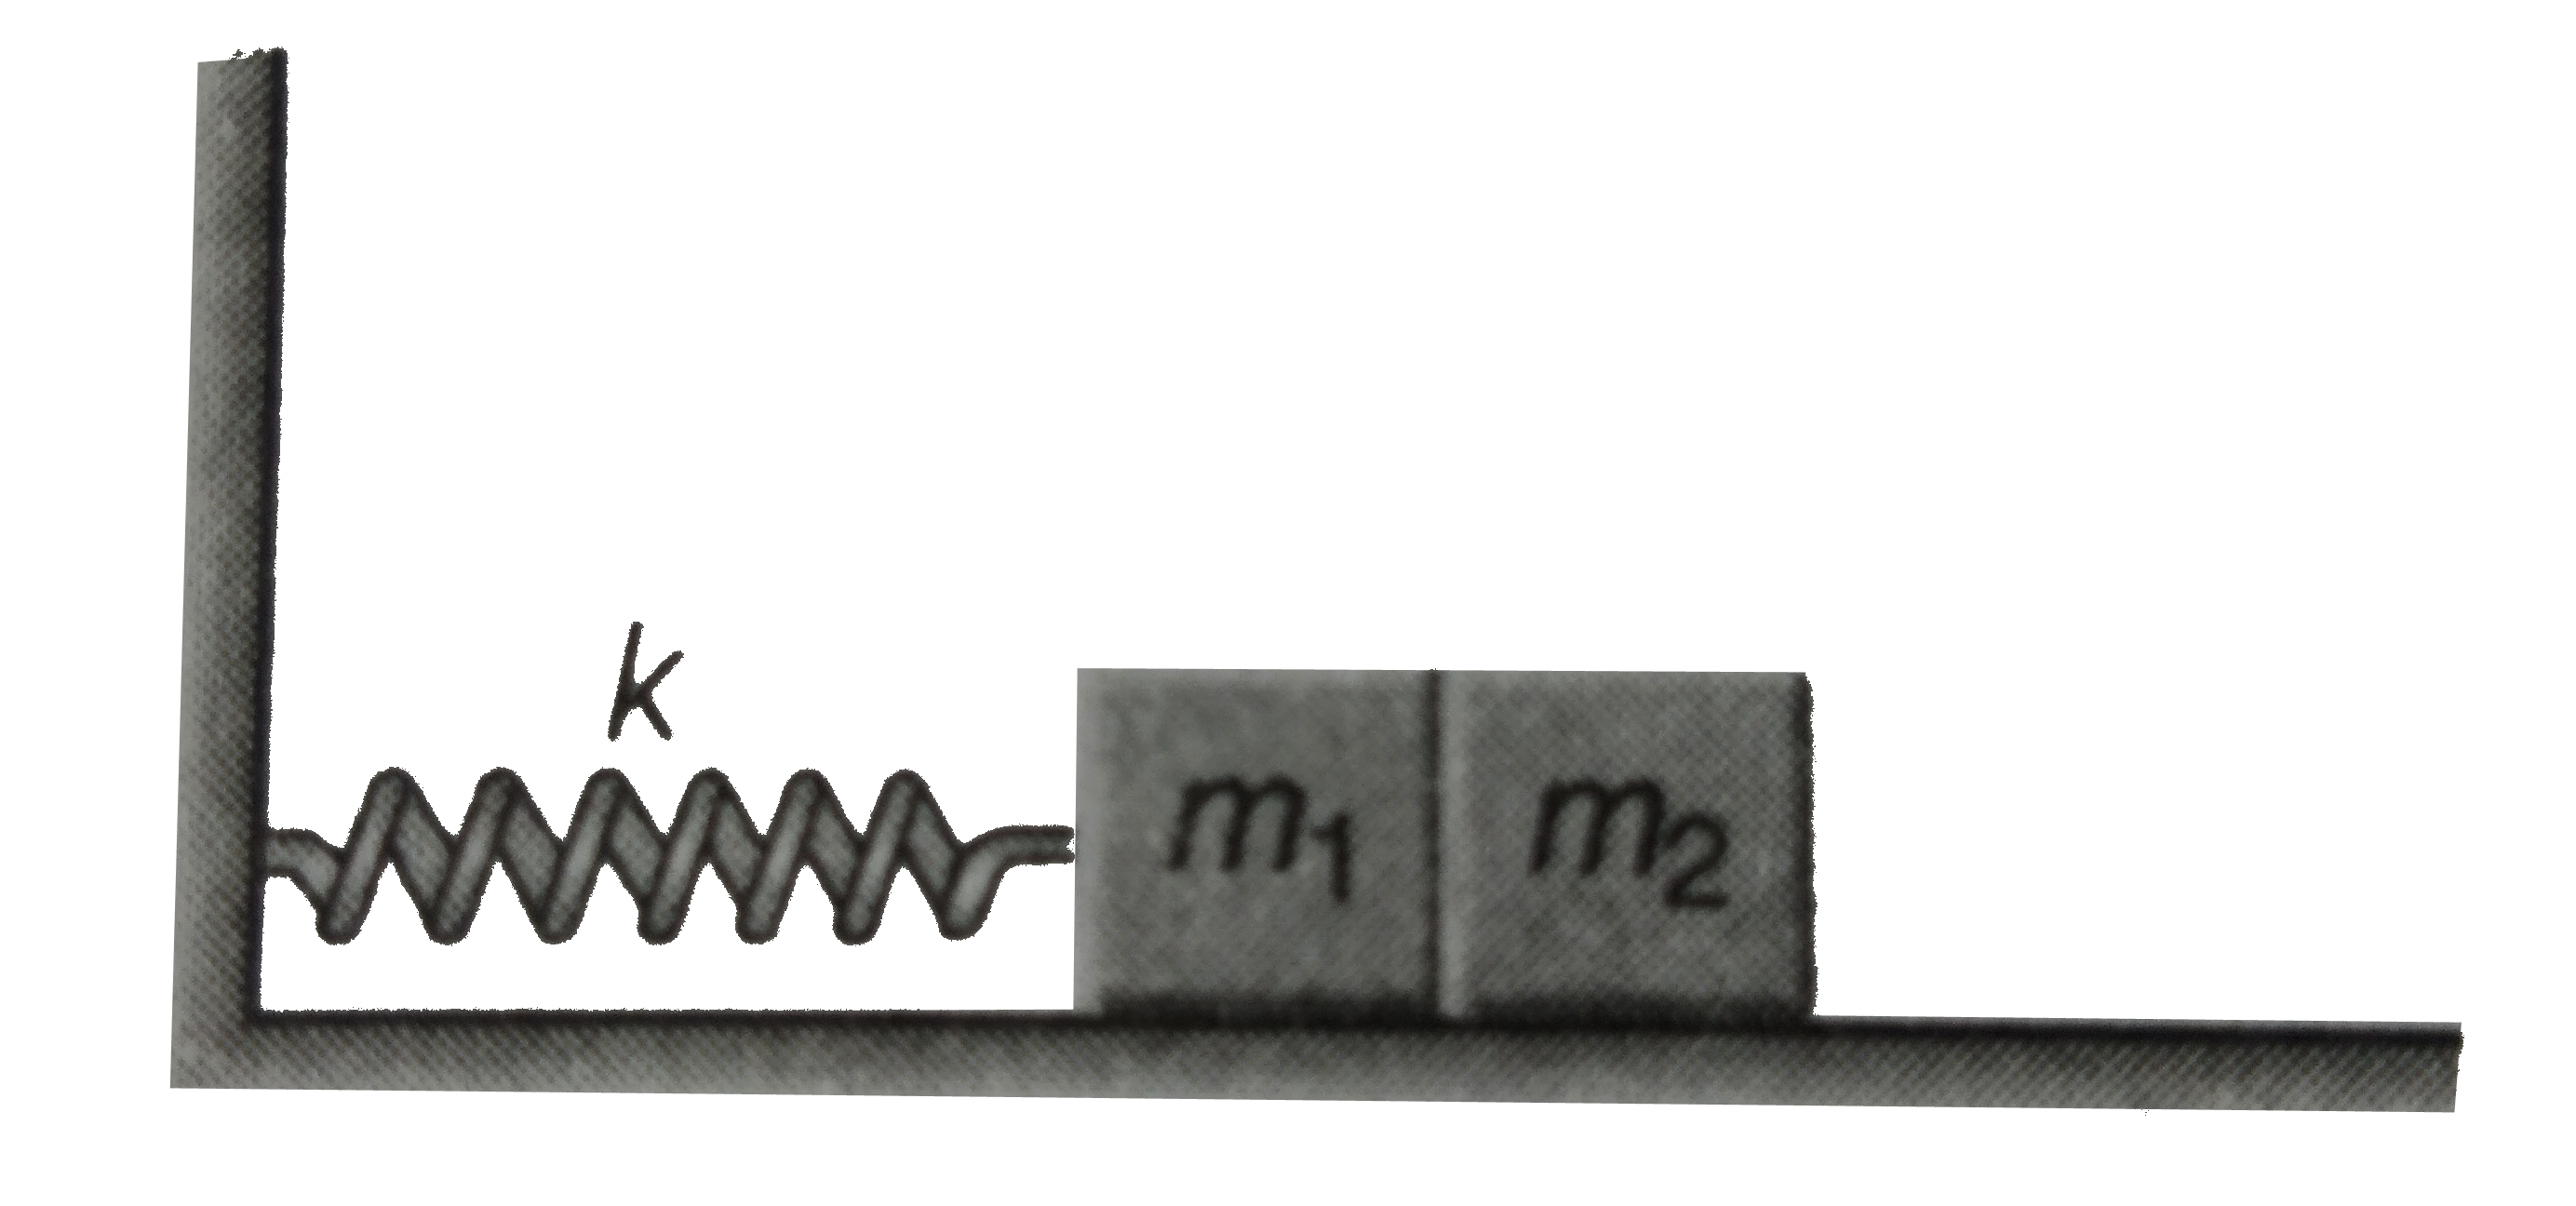 The masses in figure slide on a frictionless table. m(1) but not m(2), is fastened to the spring. If now m(1) and m(2) are pushed to the left , so that the spring is compressed a distance d, what will be the amplitude of the oscillation of m(1) after the spring system is released ?